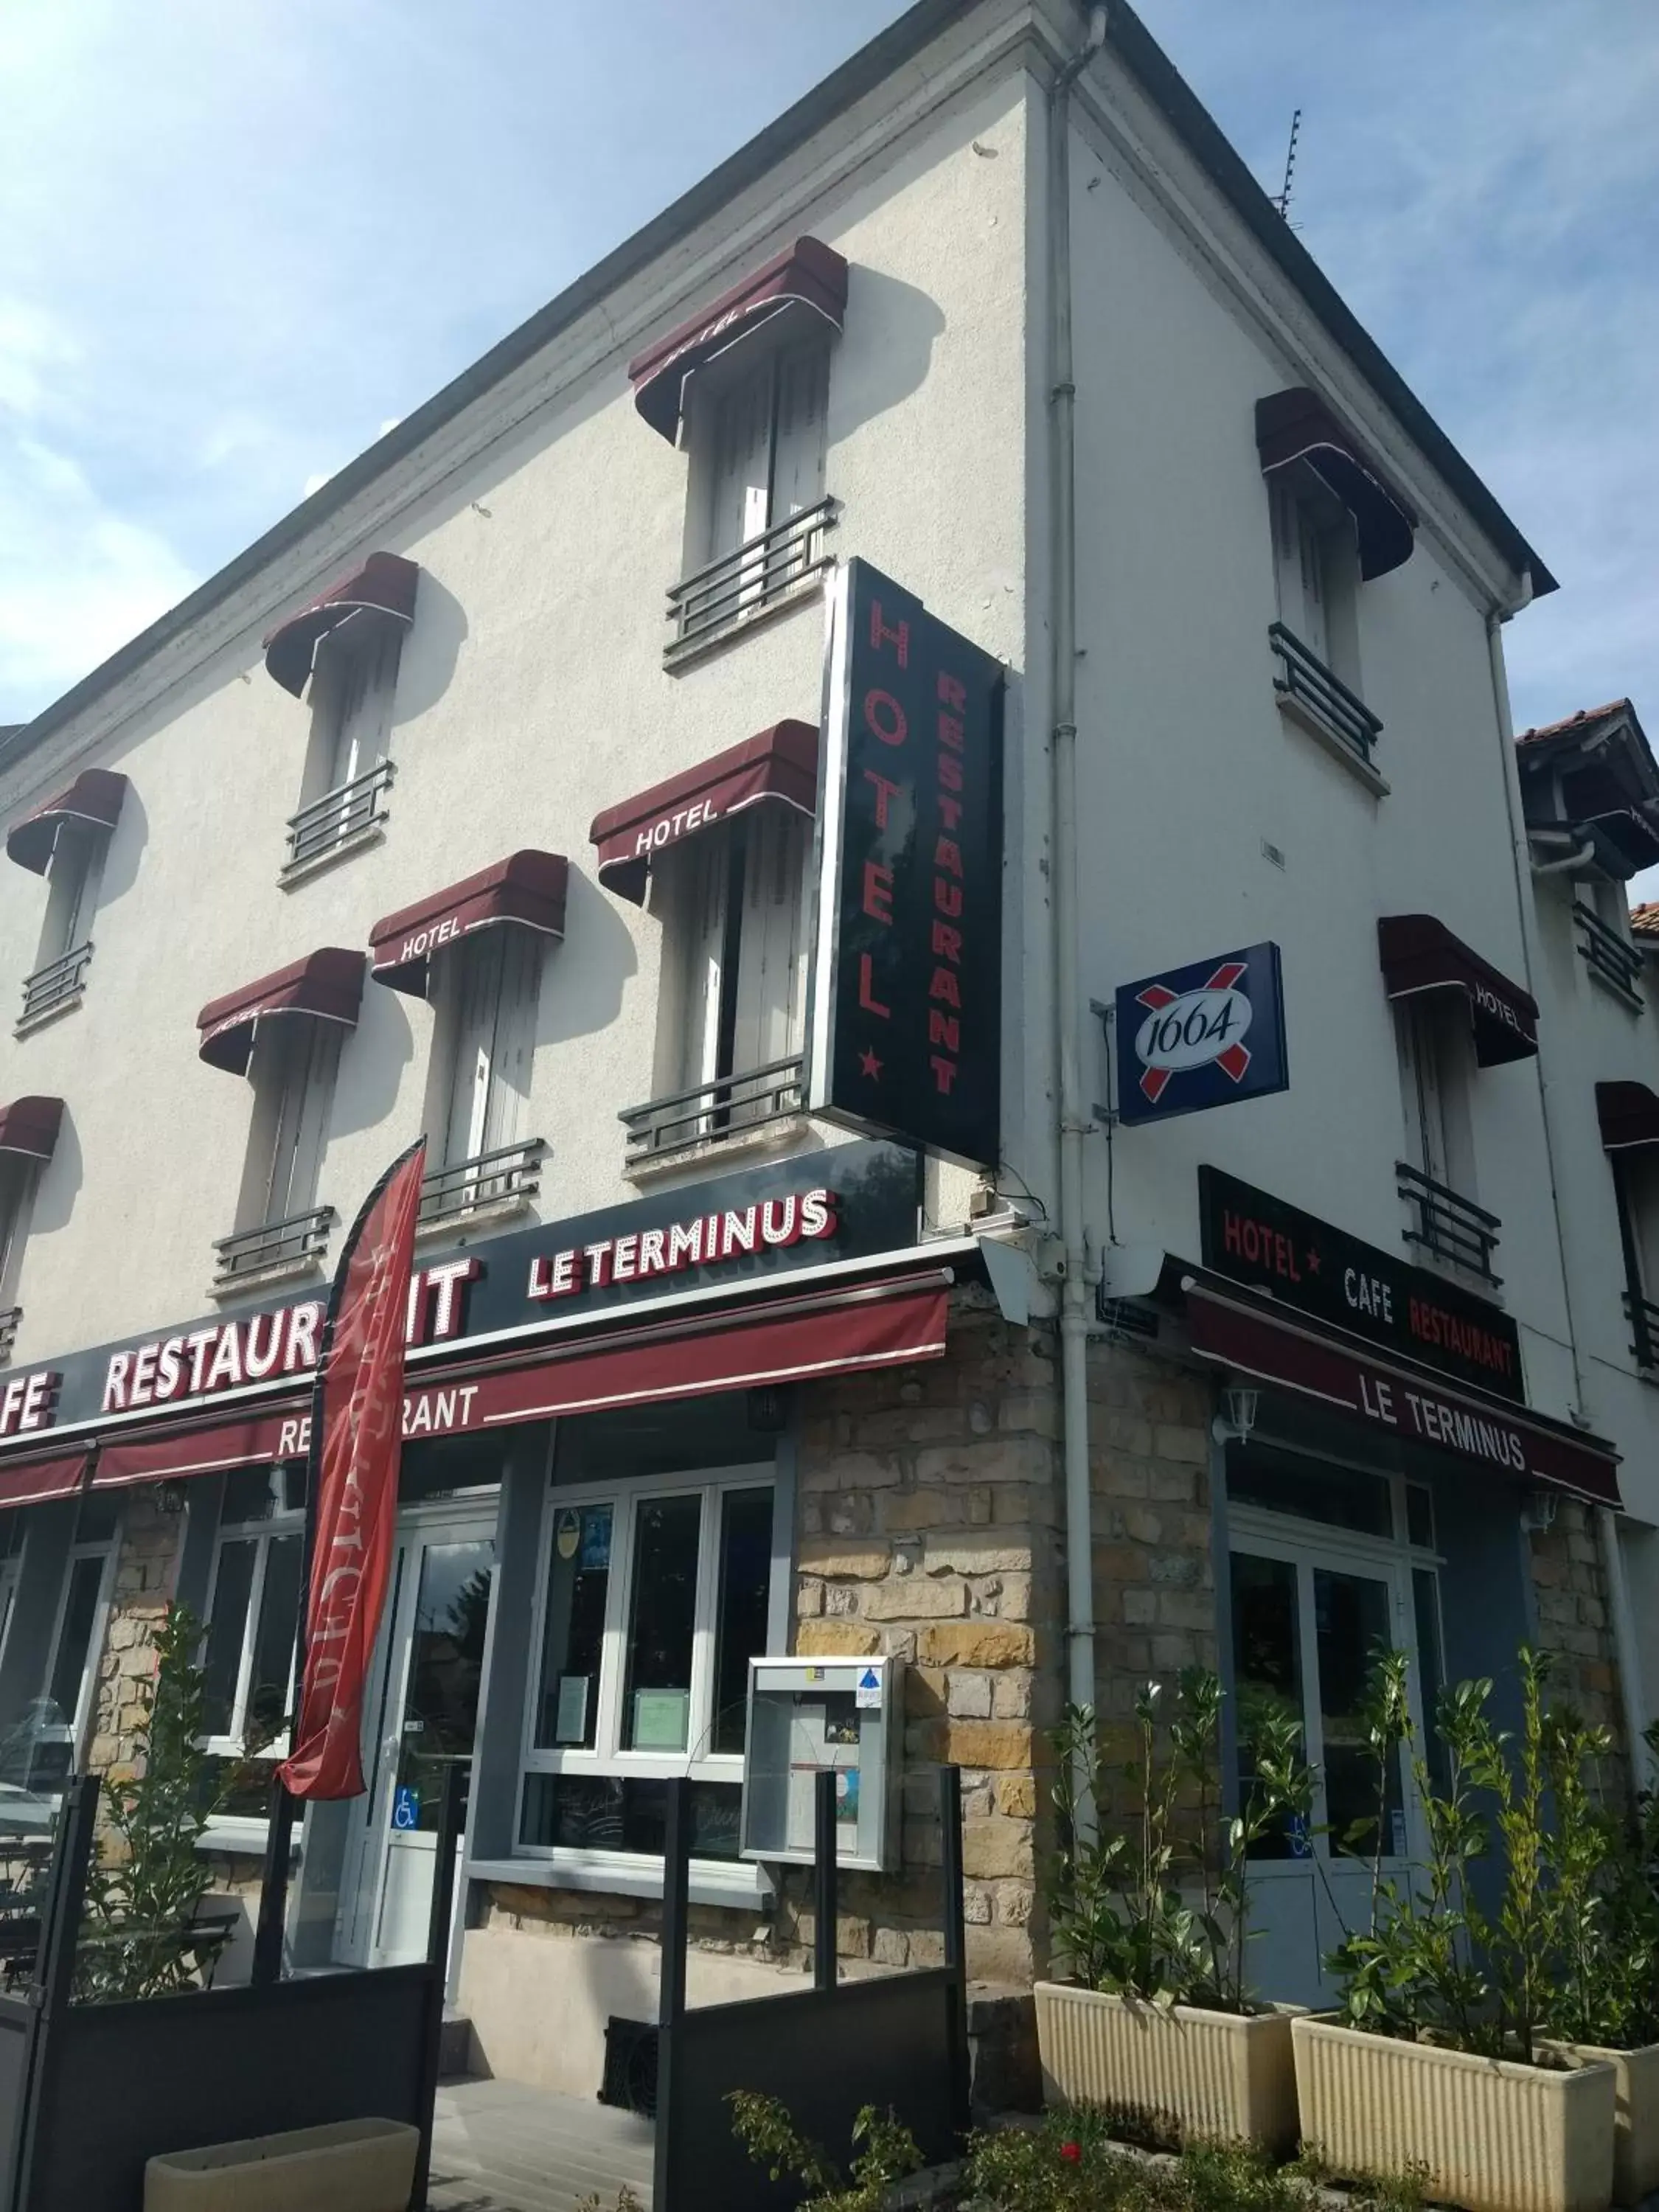 Property Building in Terminus Fontainebleau Avon